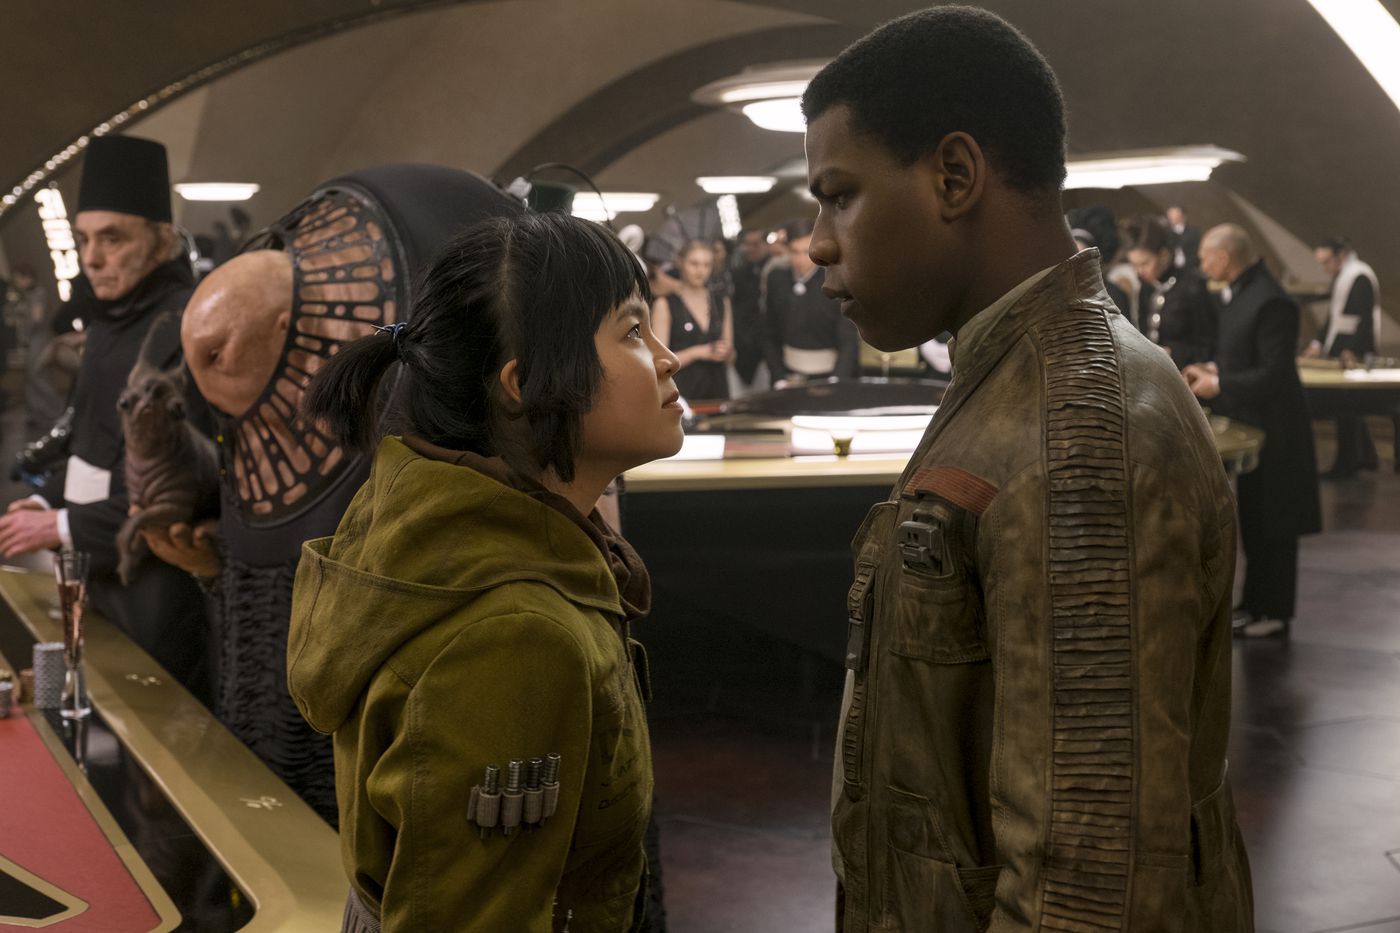 The Last Jedi Blu Ray Is A Chance To Reevaluate The Film's Divisive Casino Subplot